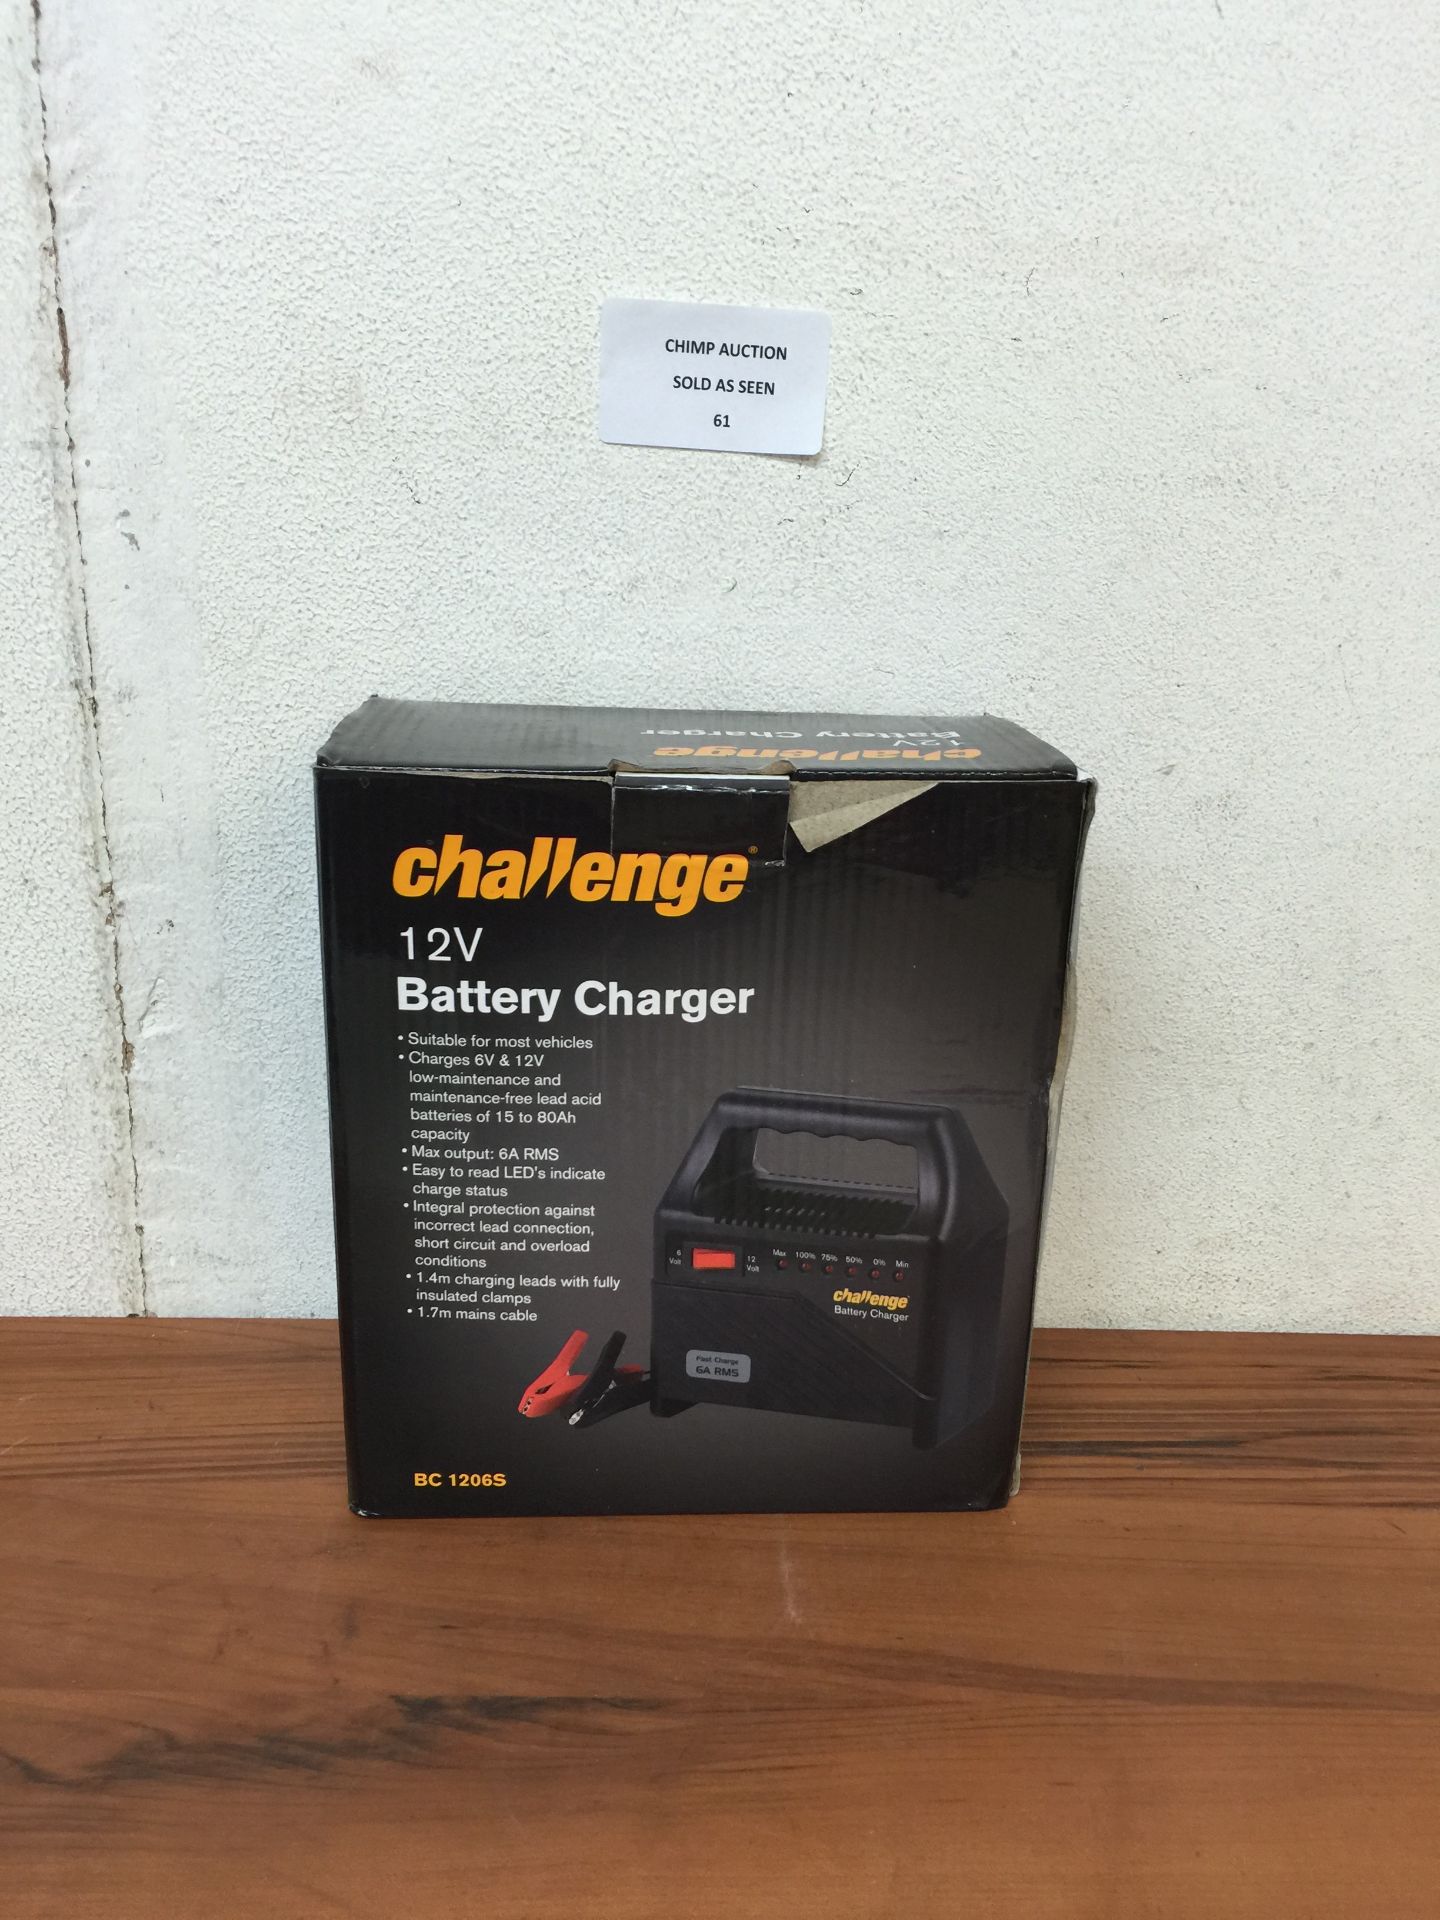 BOXED CHALLENGE 12V MULTI-CAR BATTERY CHARGER